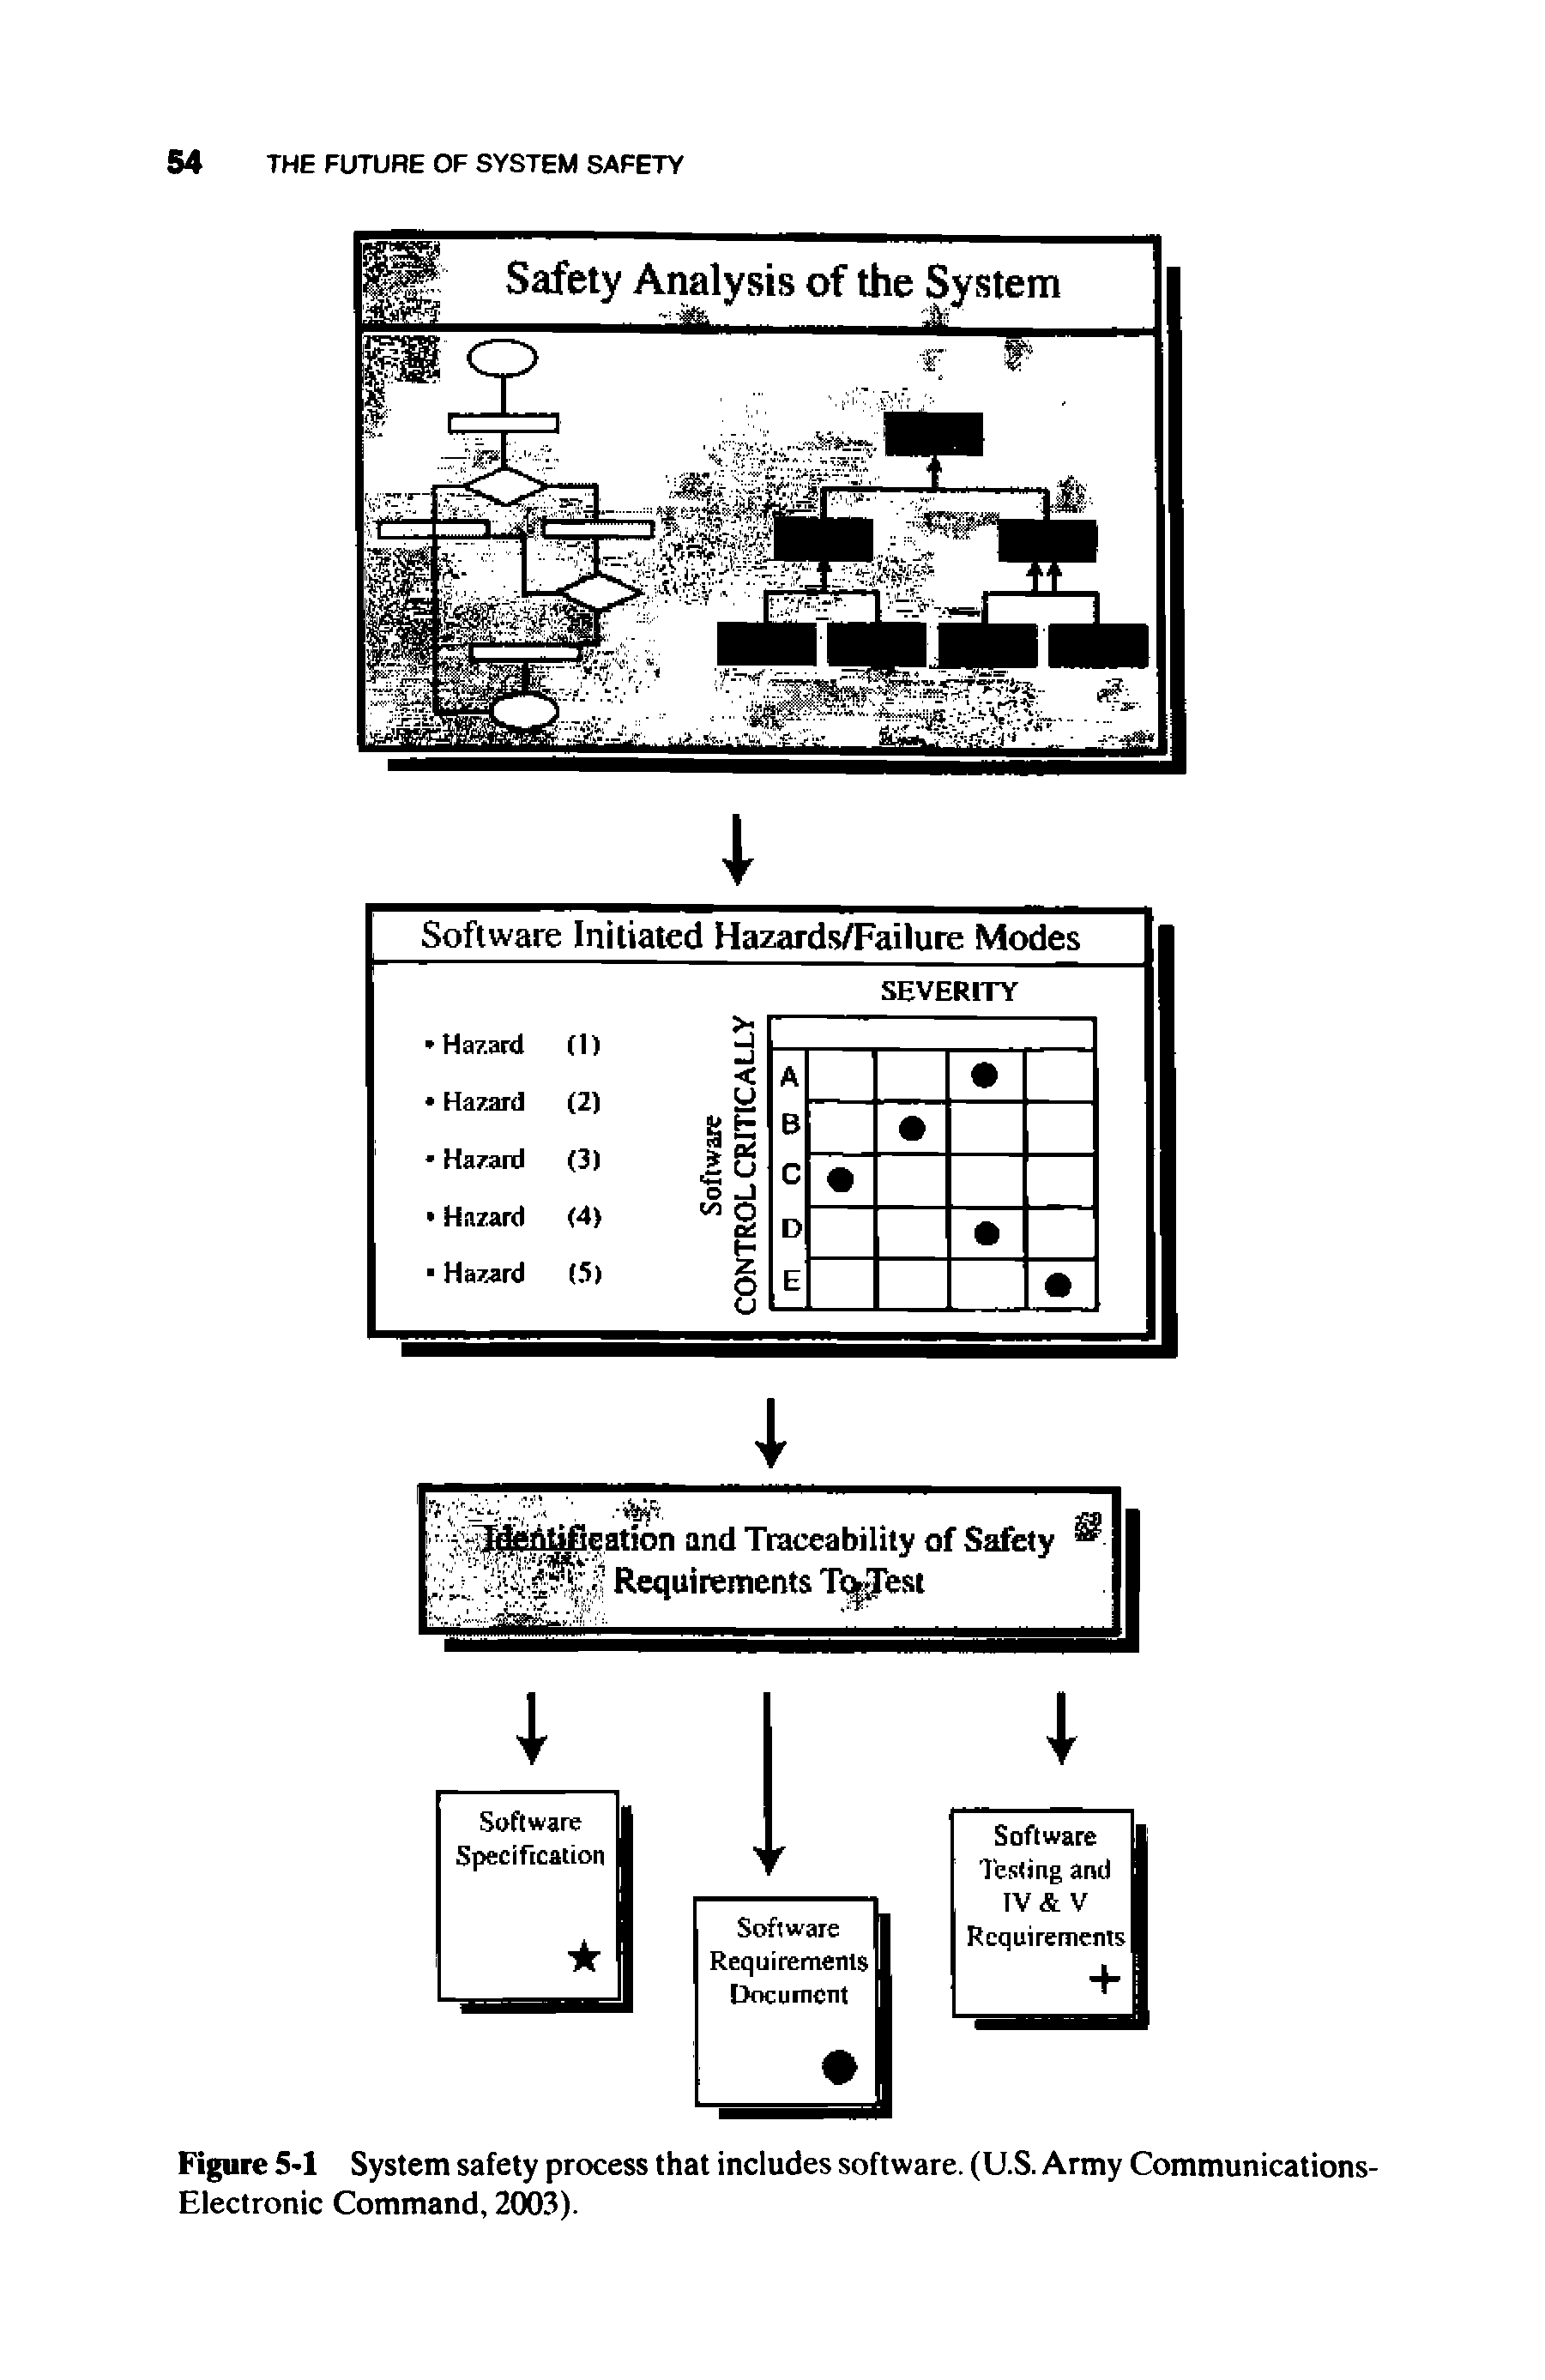 Figure 5-1 System safety process that includes software. (U.S. Army Communications-Electronic Command, 2003).